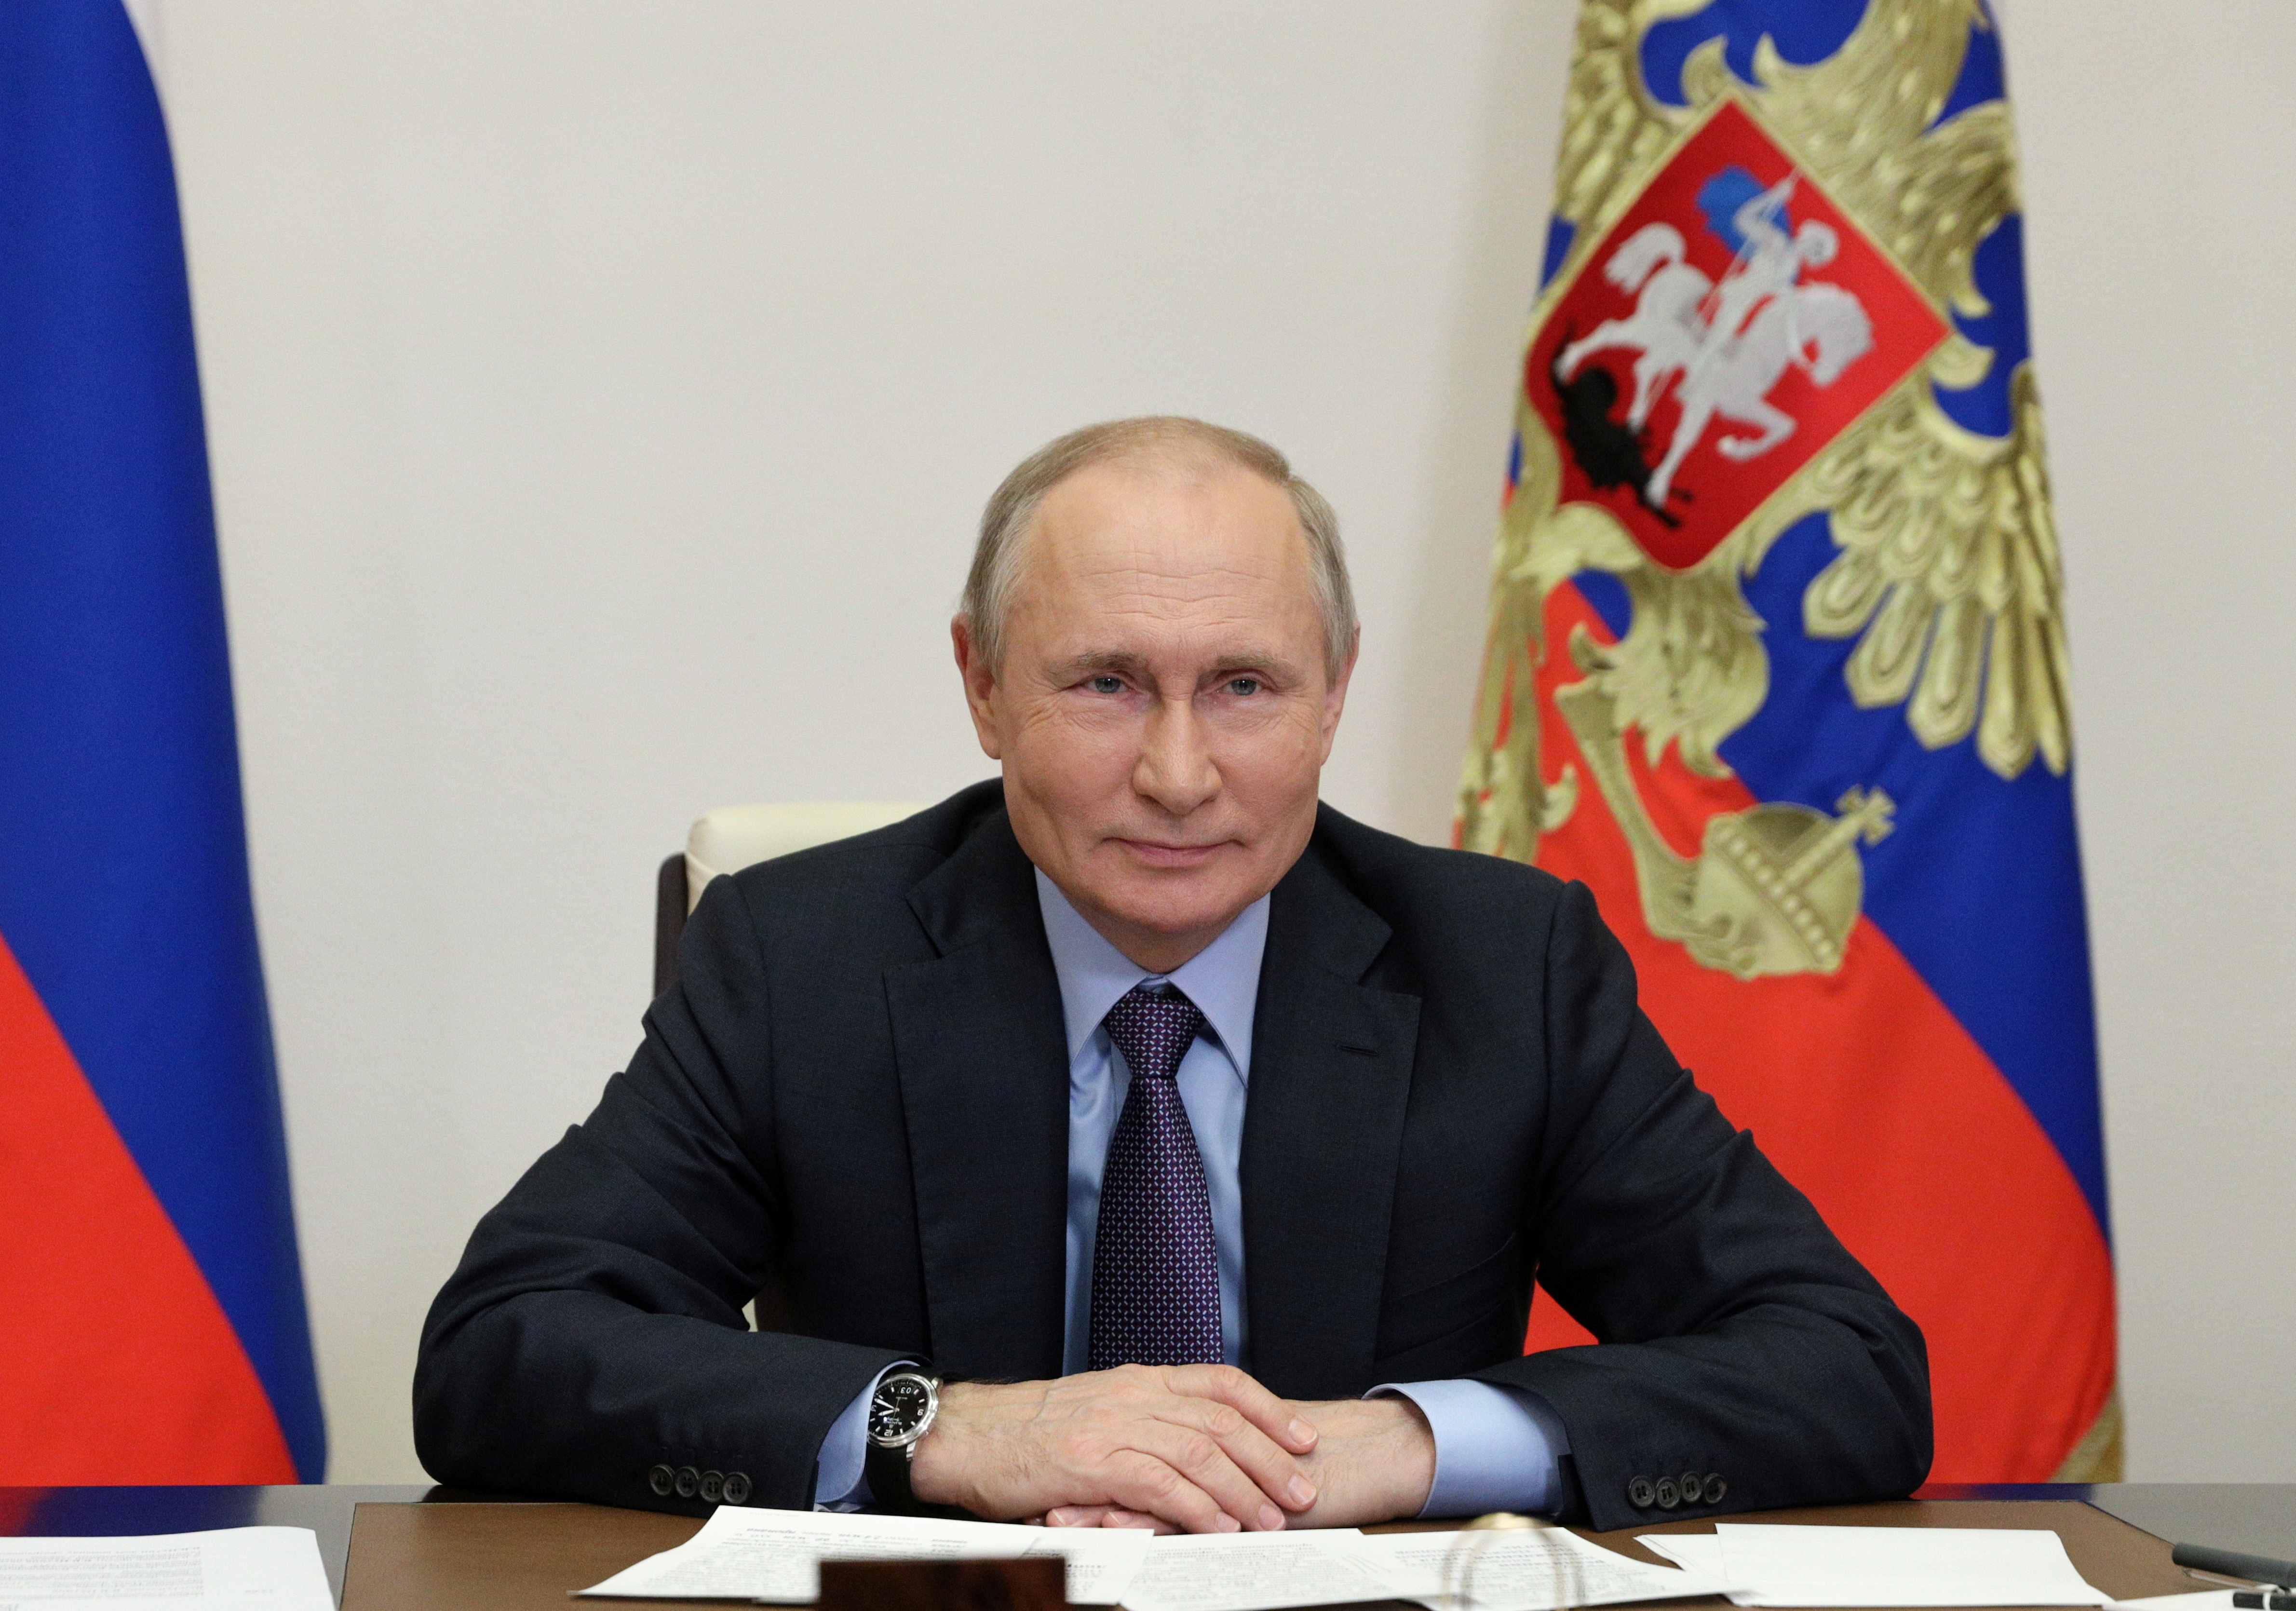 Russian President Vladimir Putin takes part in a ceremony launching the Amur gas processing plant managed by Gazprom company via video link outside Moscow, Russia June 9, 2021. Sputnik/Sergei Ilyin/Kremlin via REUTERS